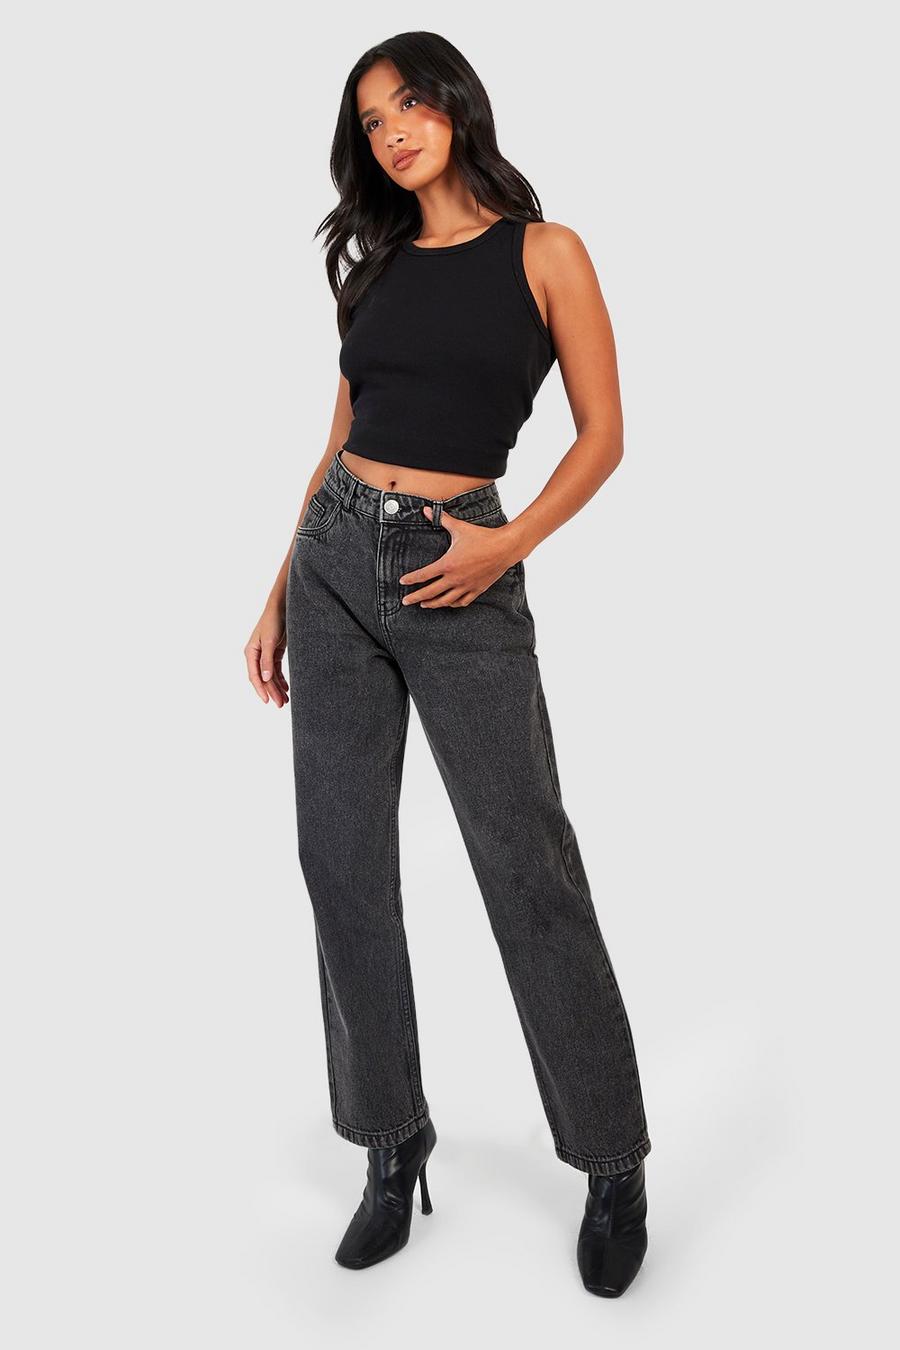 The Complete Wide Leg Jeans Guide for Petite Women - Petite